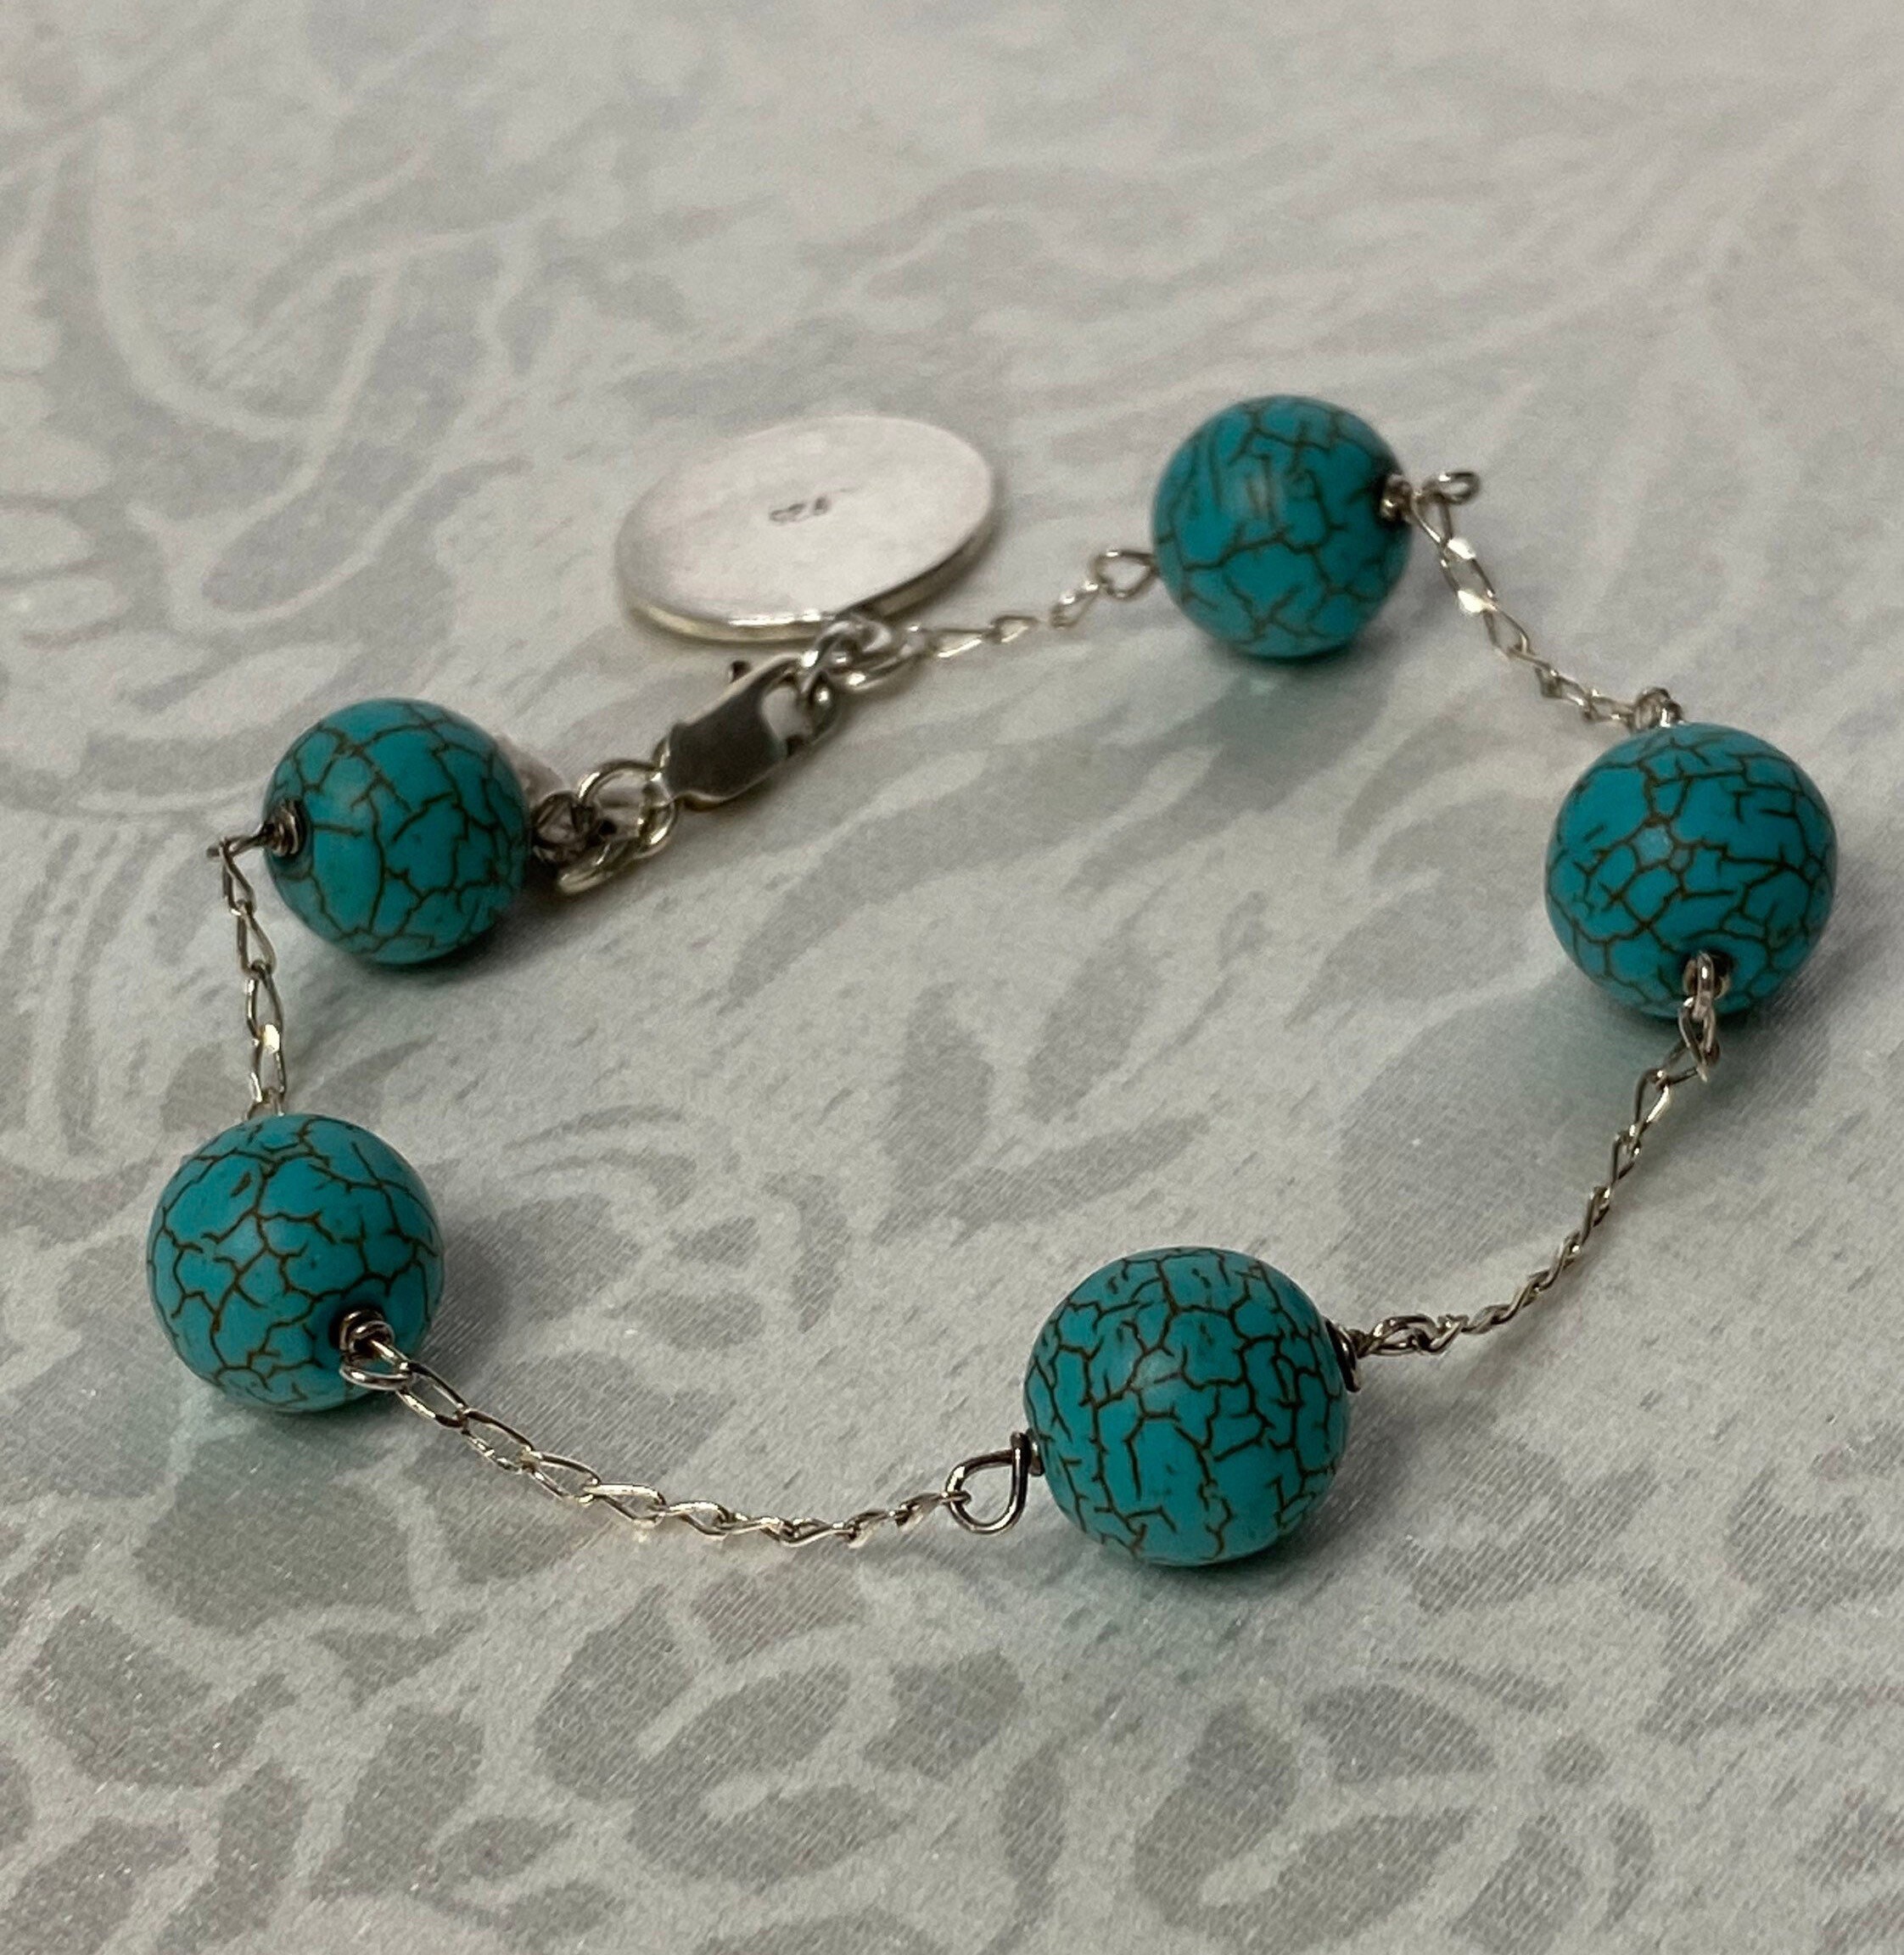 Exquisite Turquoise Jewelry for Men | Silver Turquoise Beaded Bracelets 10mm